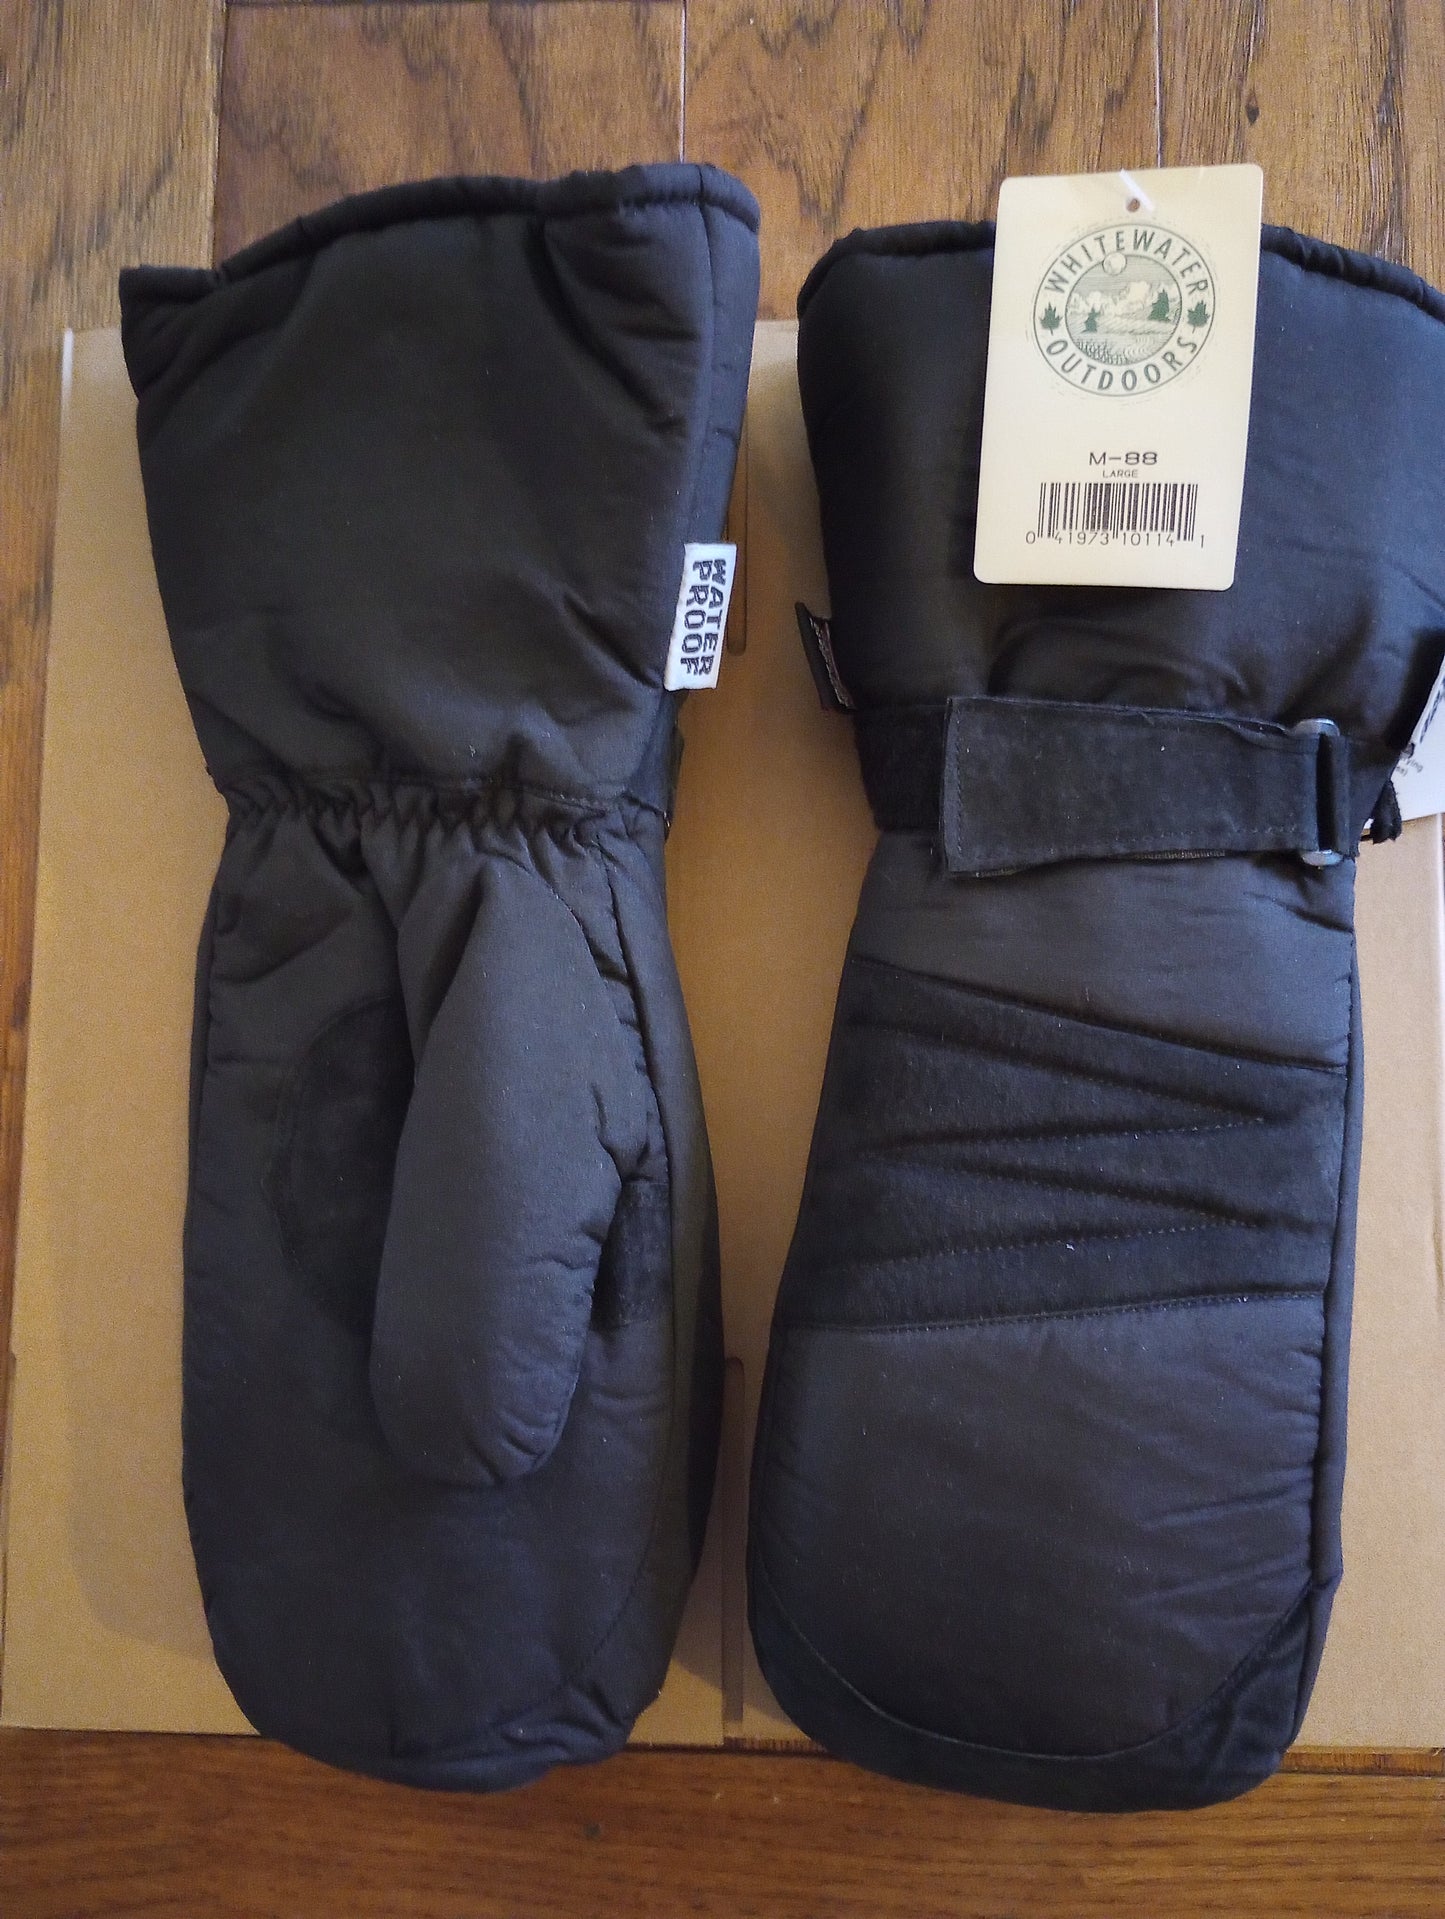 WHITEWATER THINSULATE BLACK MITTENS HOLLOFIL 808 COLD WEATHER WATER PROOF